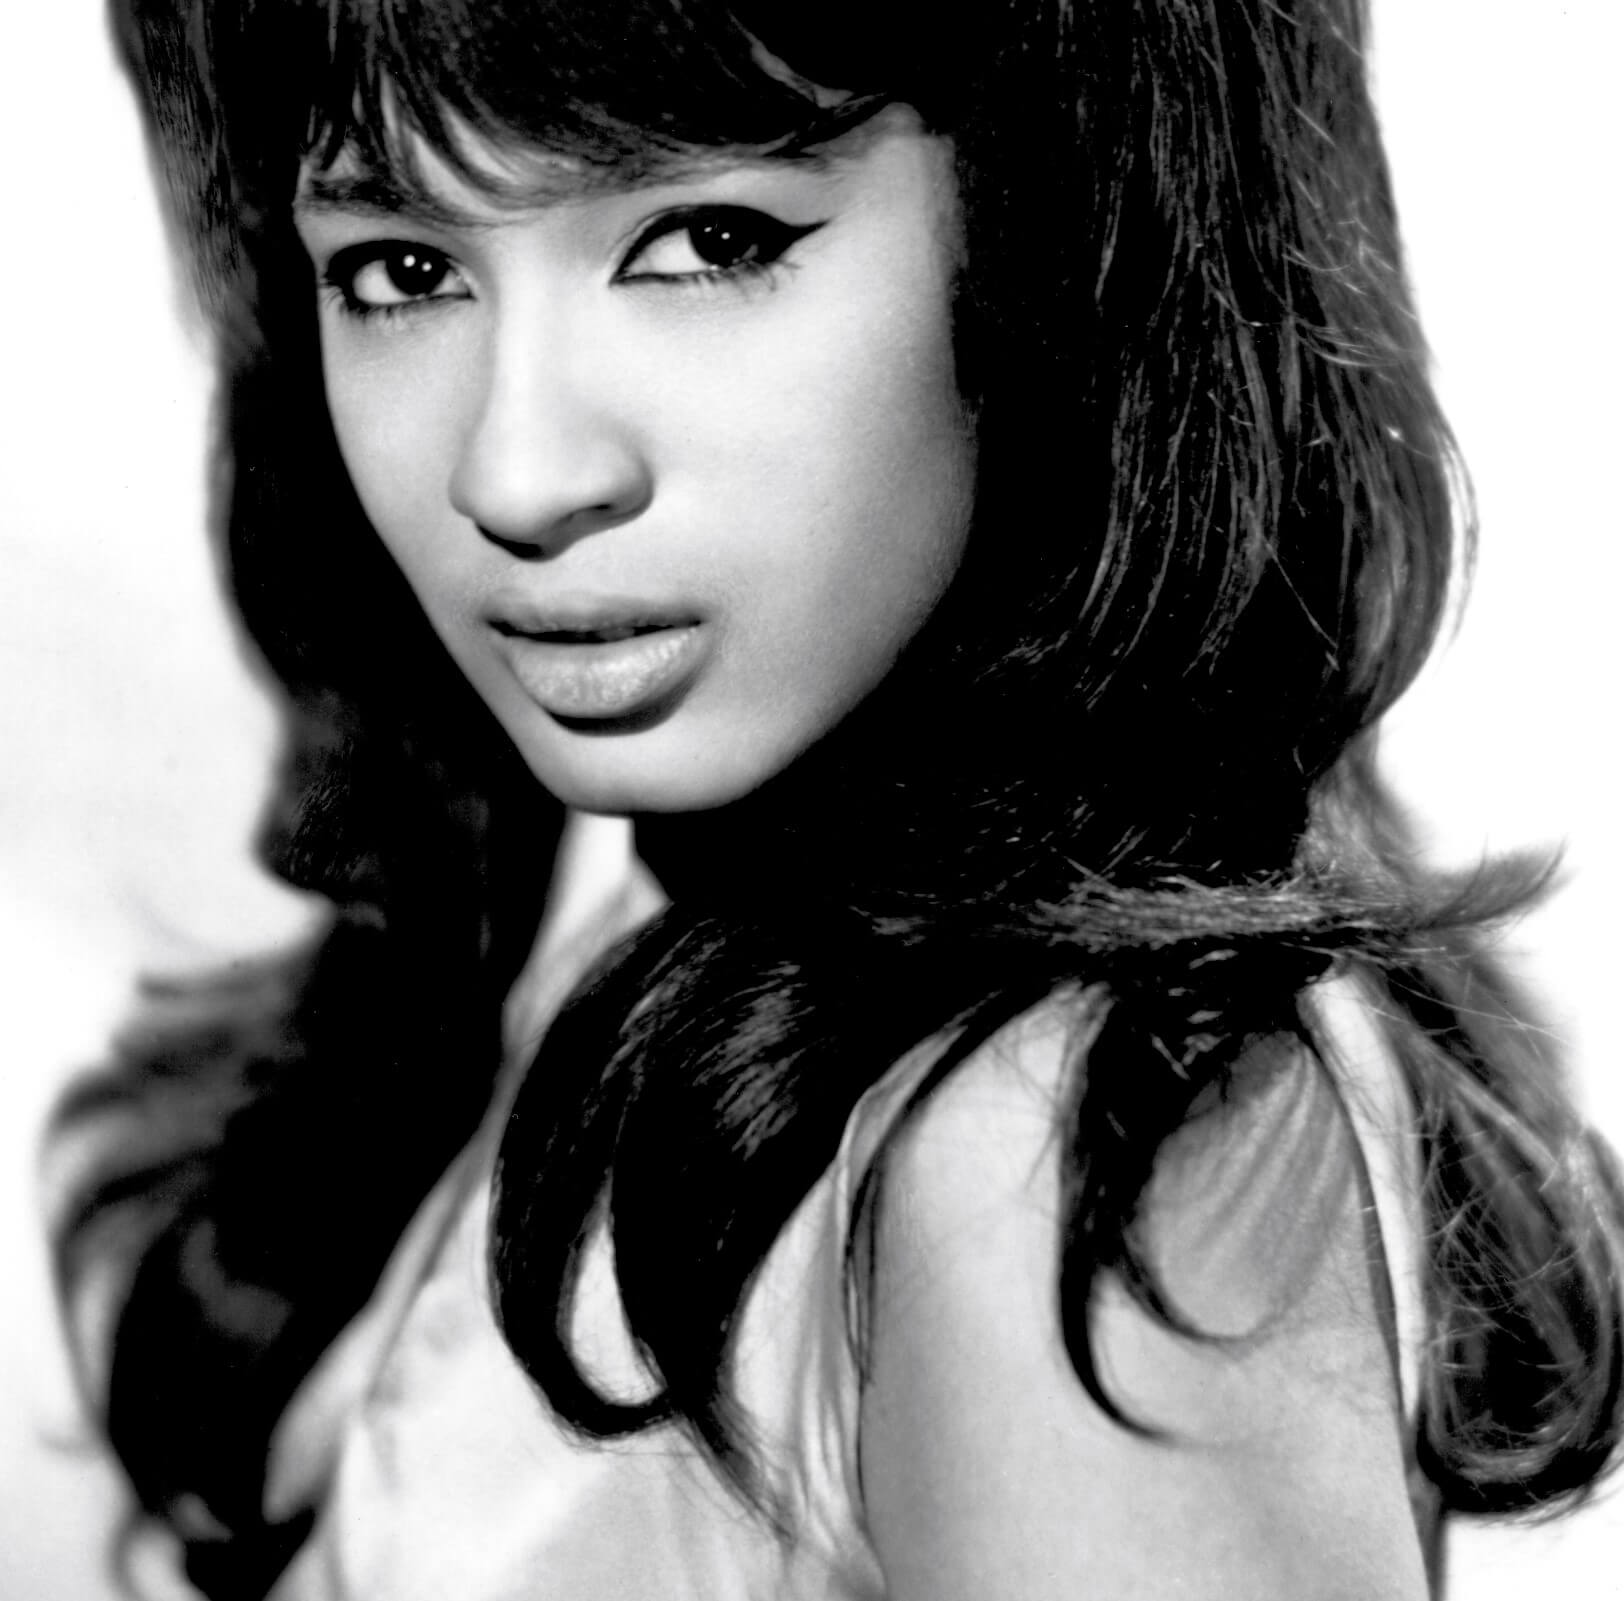 The Ronettes' Ronnie Spector in black-and-white